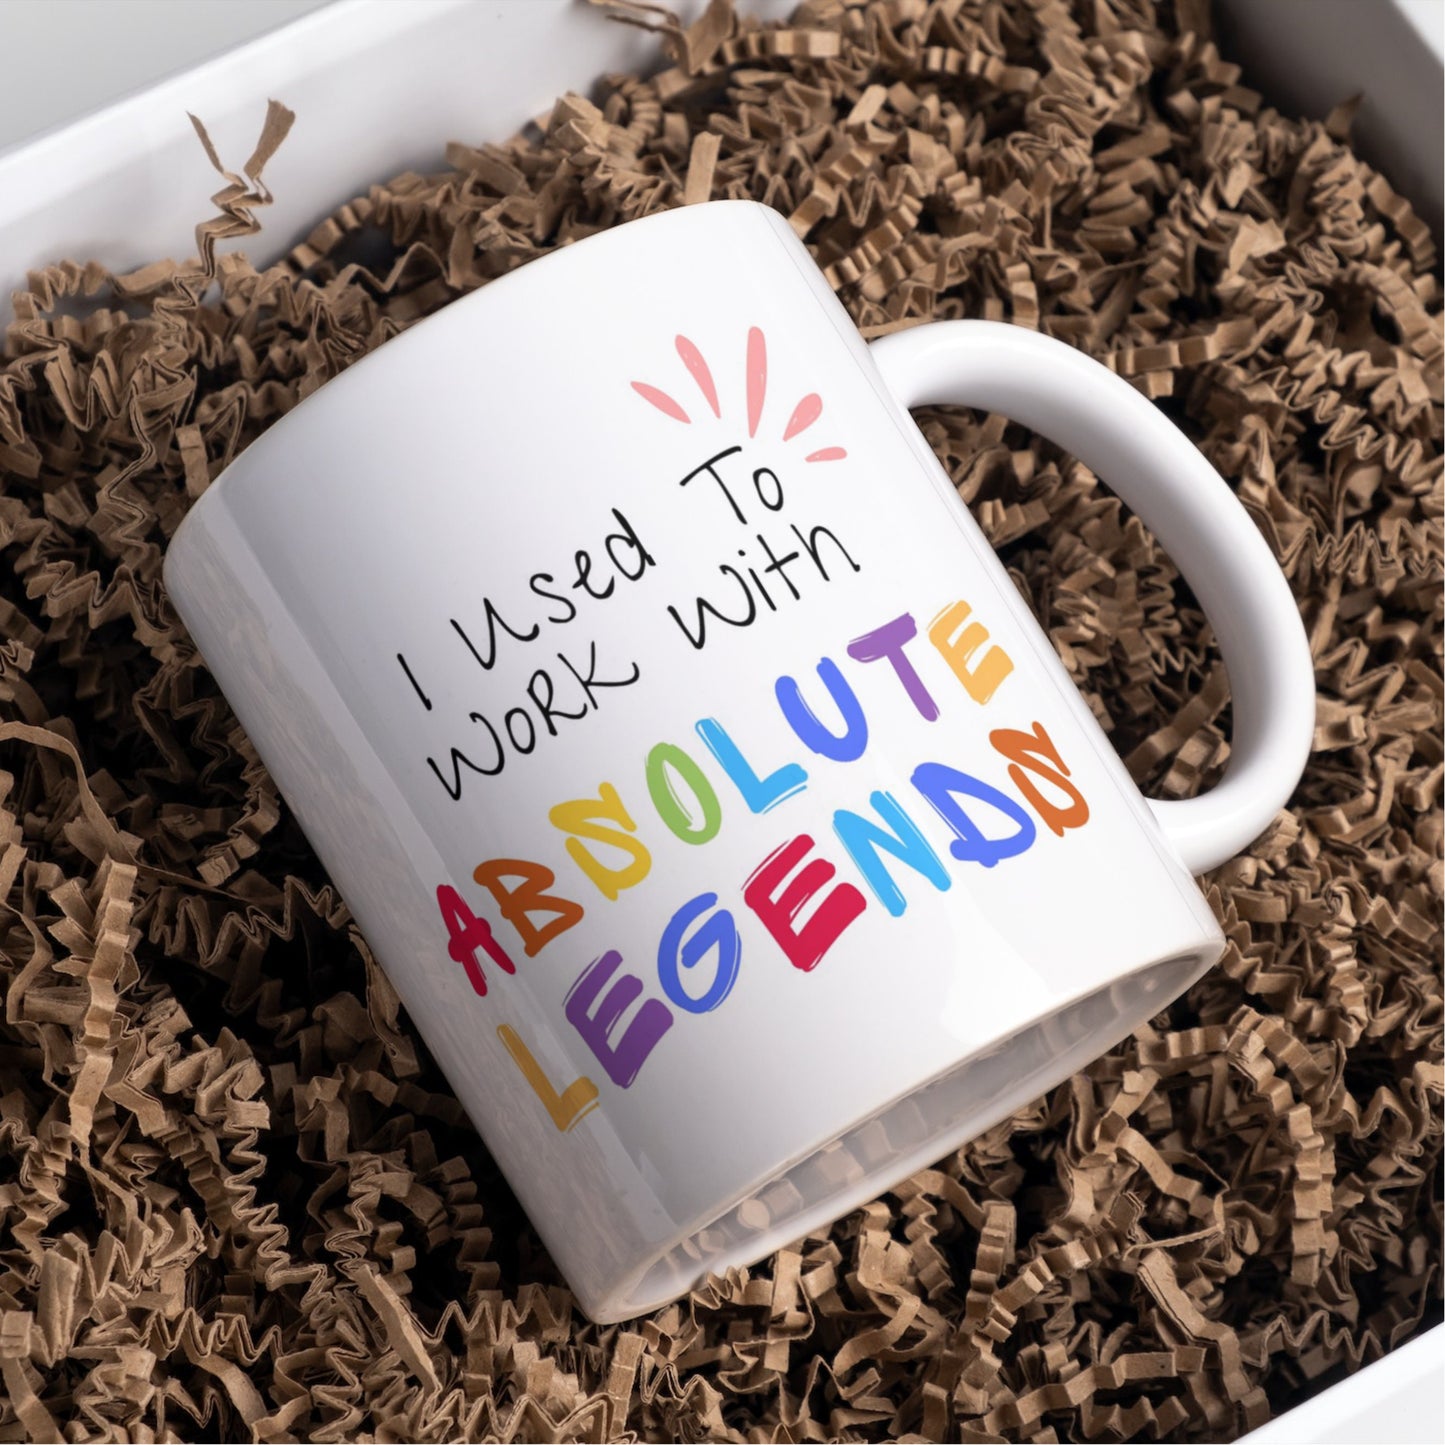 I used to work with absolute legends Mug, leaving gift